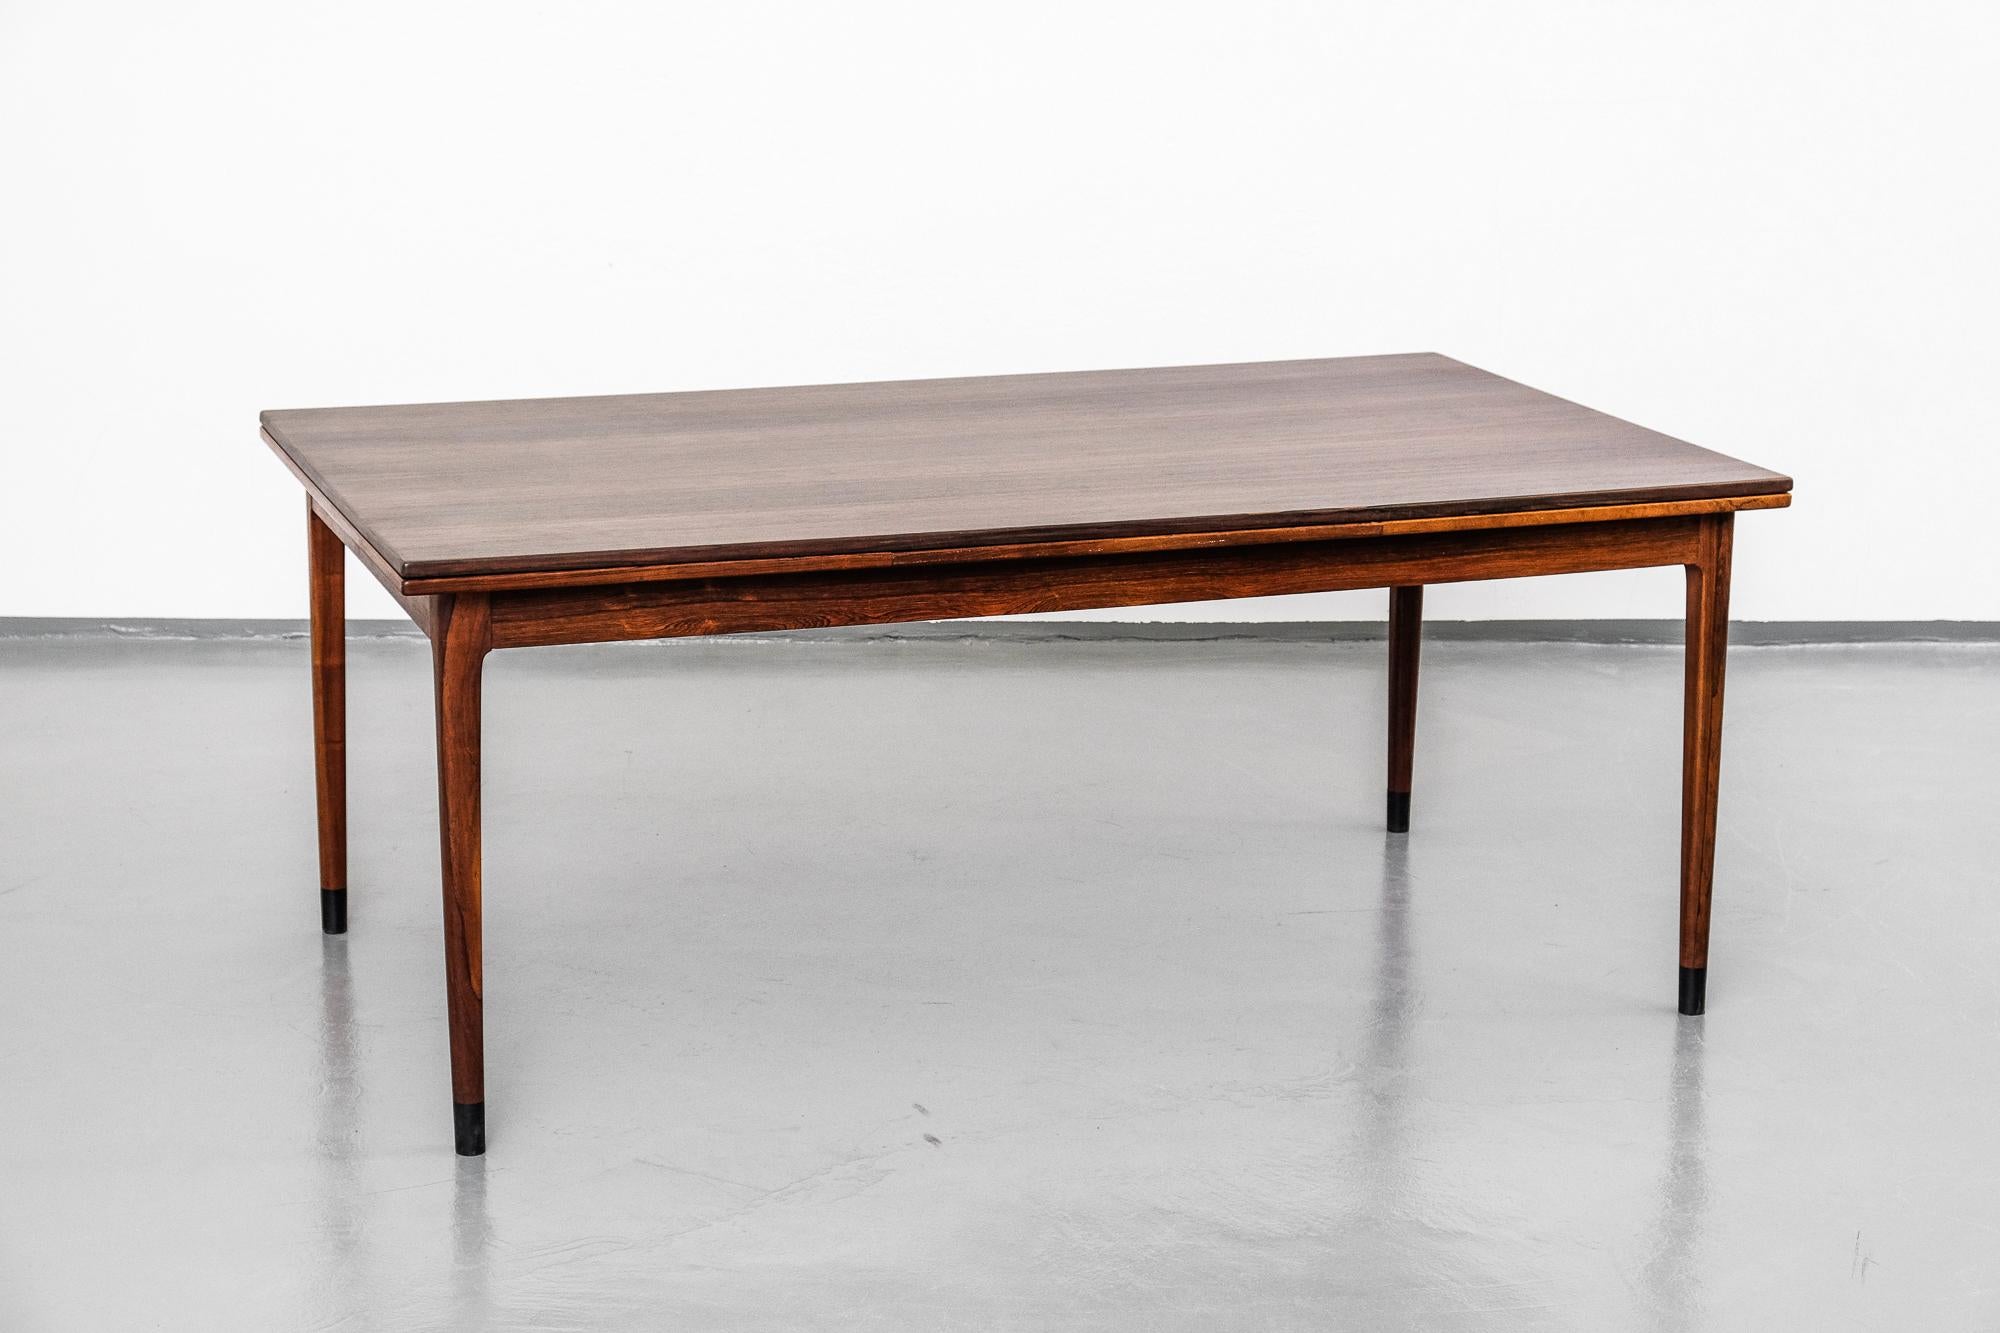 Massive and rare dining table in rosewood, model 9B designed by Niels O. Møller. Produced by J.L Møllers Møbelfabrik in Denmark, 1960s.

12 person dining table / maximum length 295 cm, when both extensions are in use.

This table will be shipped